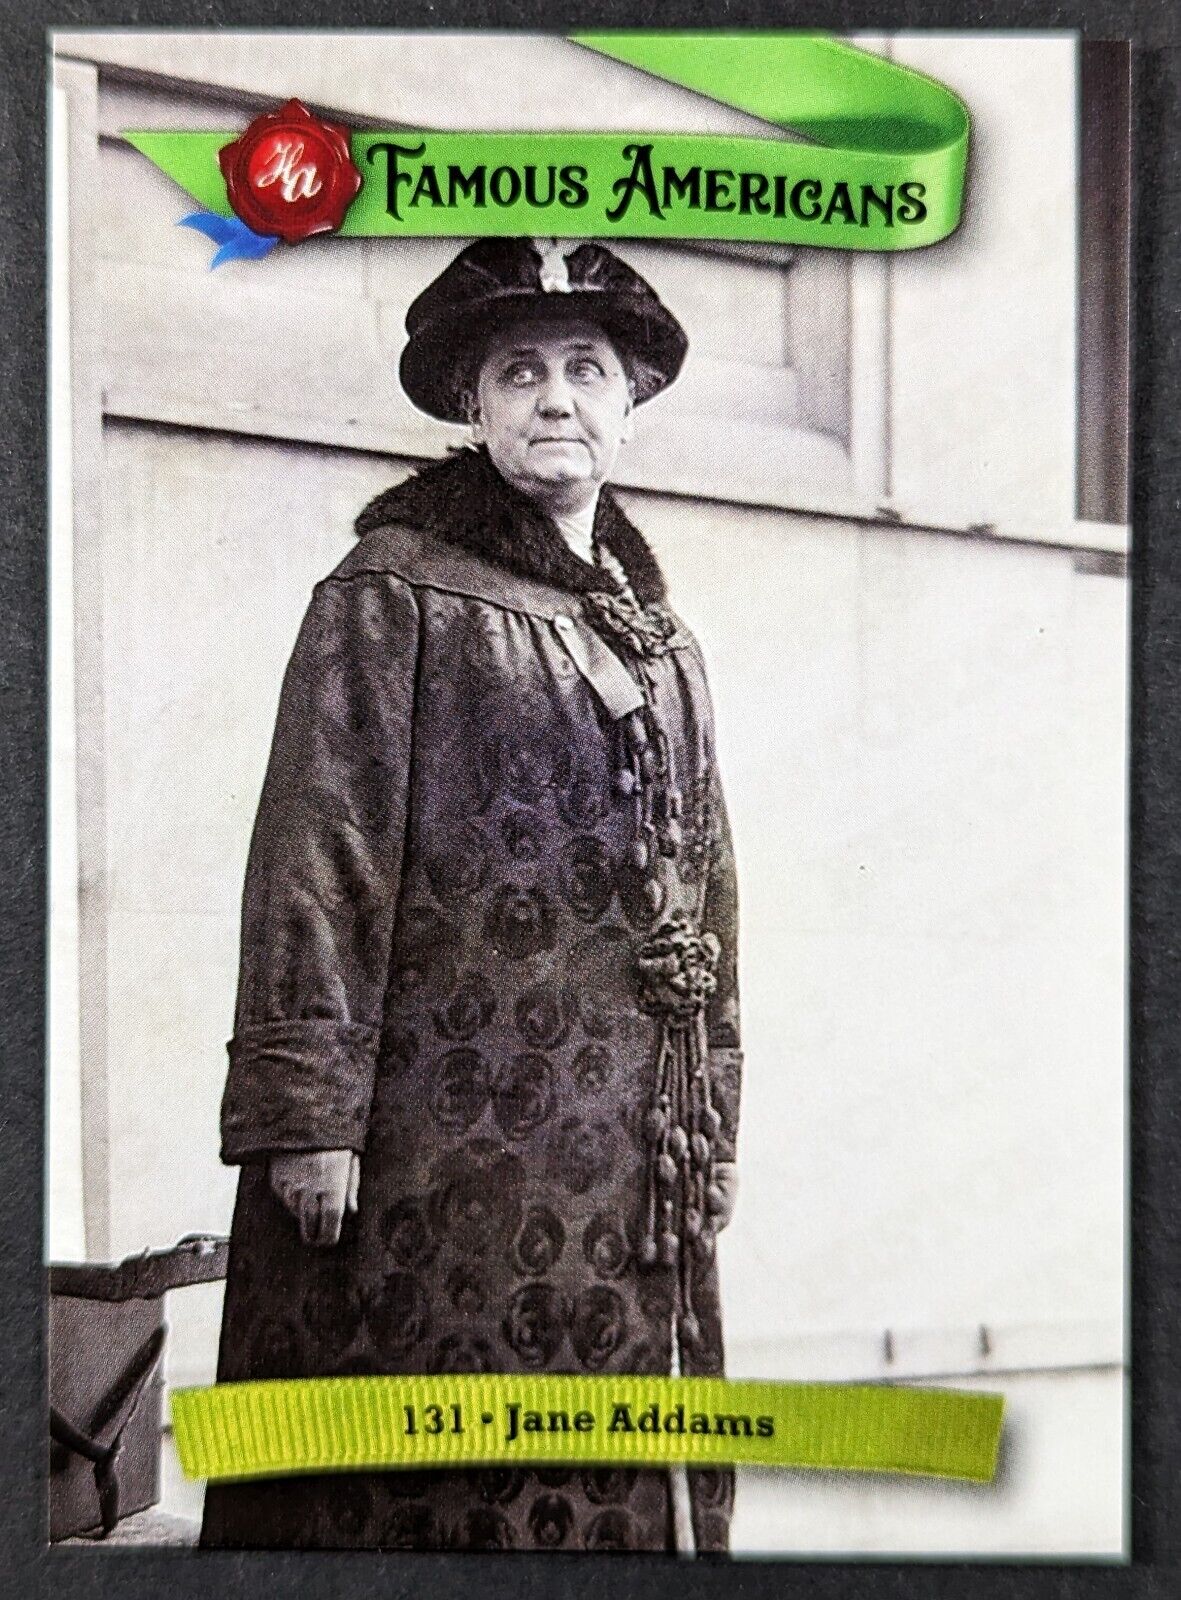 Jane Addams Social Worker Author 2021 Famous American Card #131 (NM)